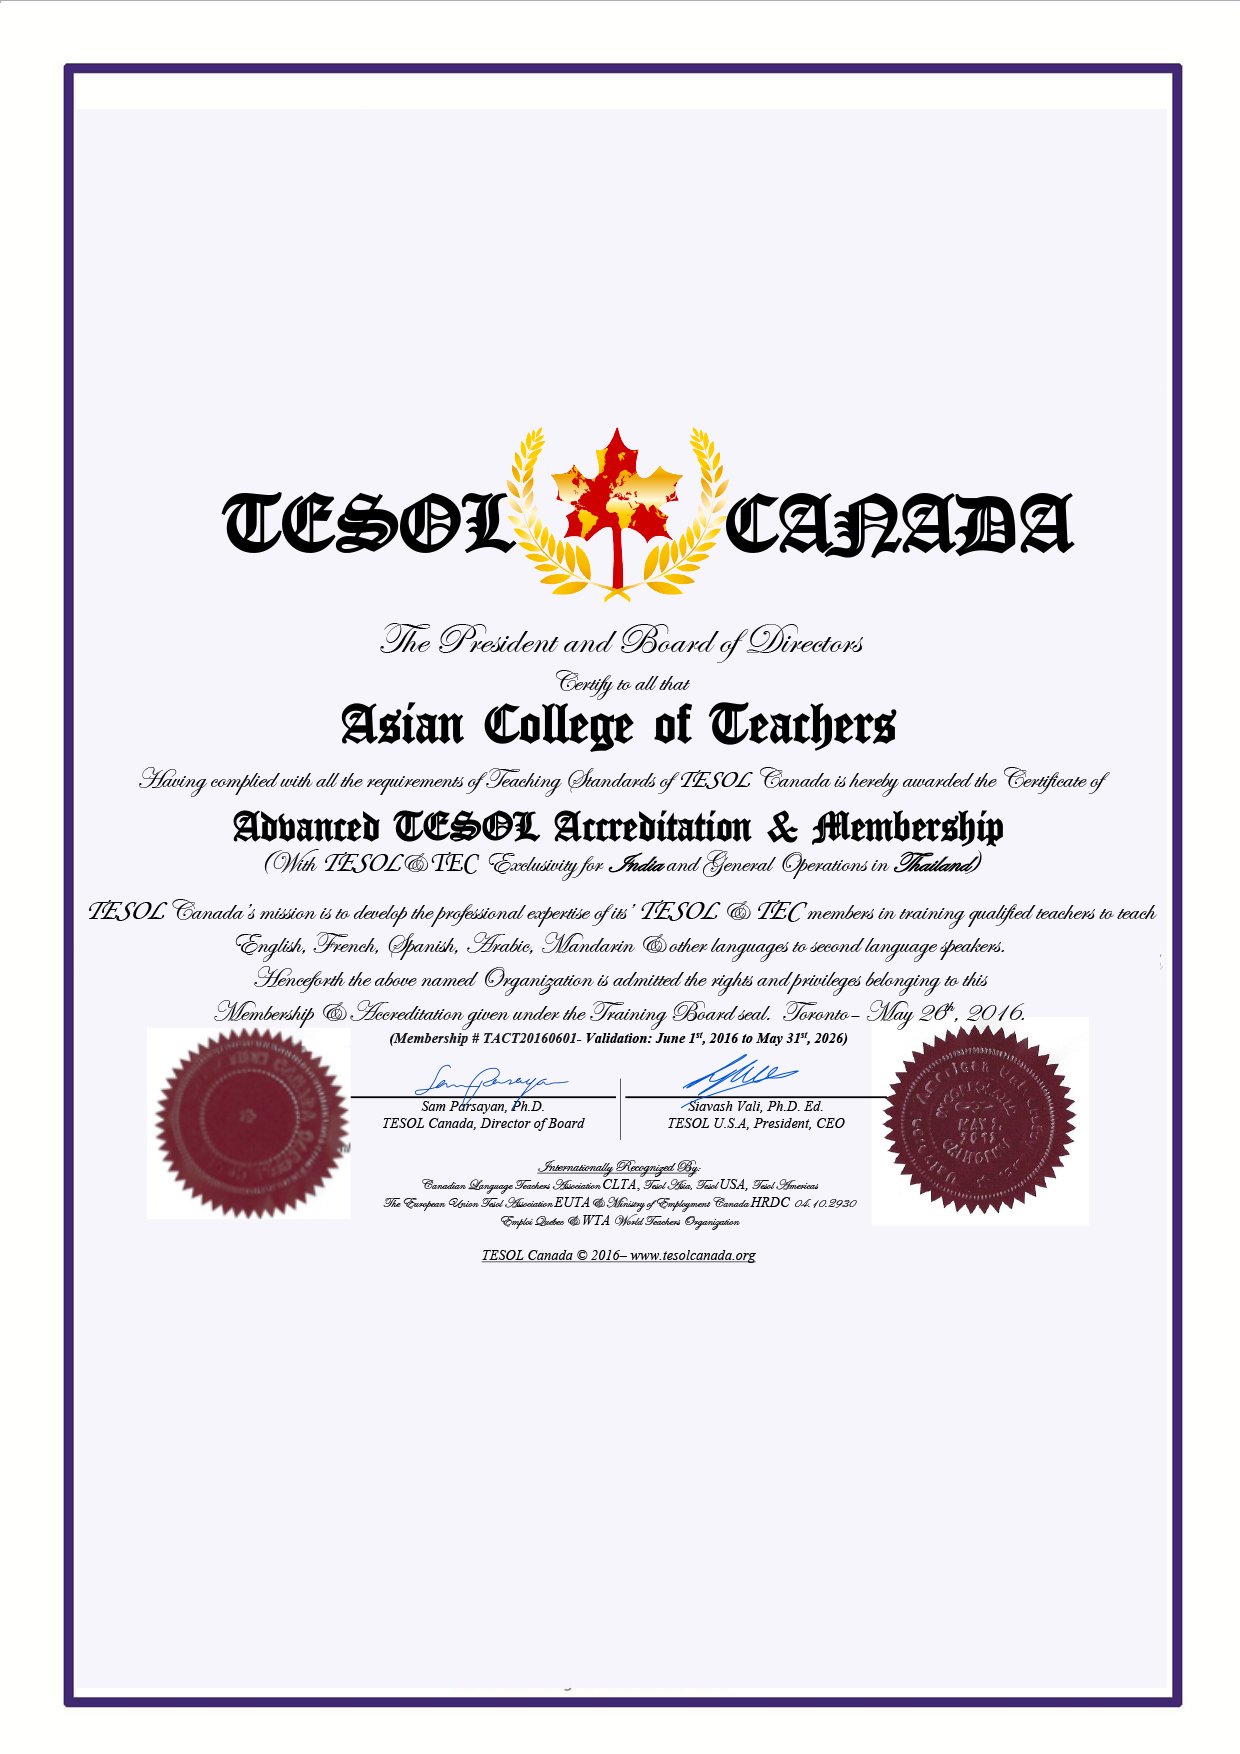 TESOL Canada Accredited Certificate of Asian College of Teachers (ACT)